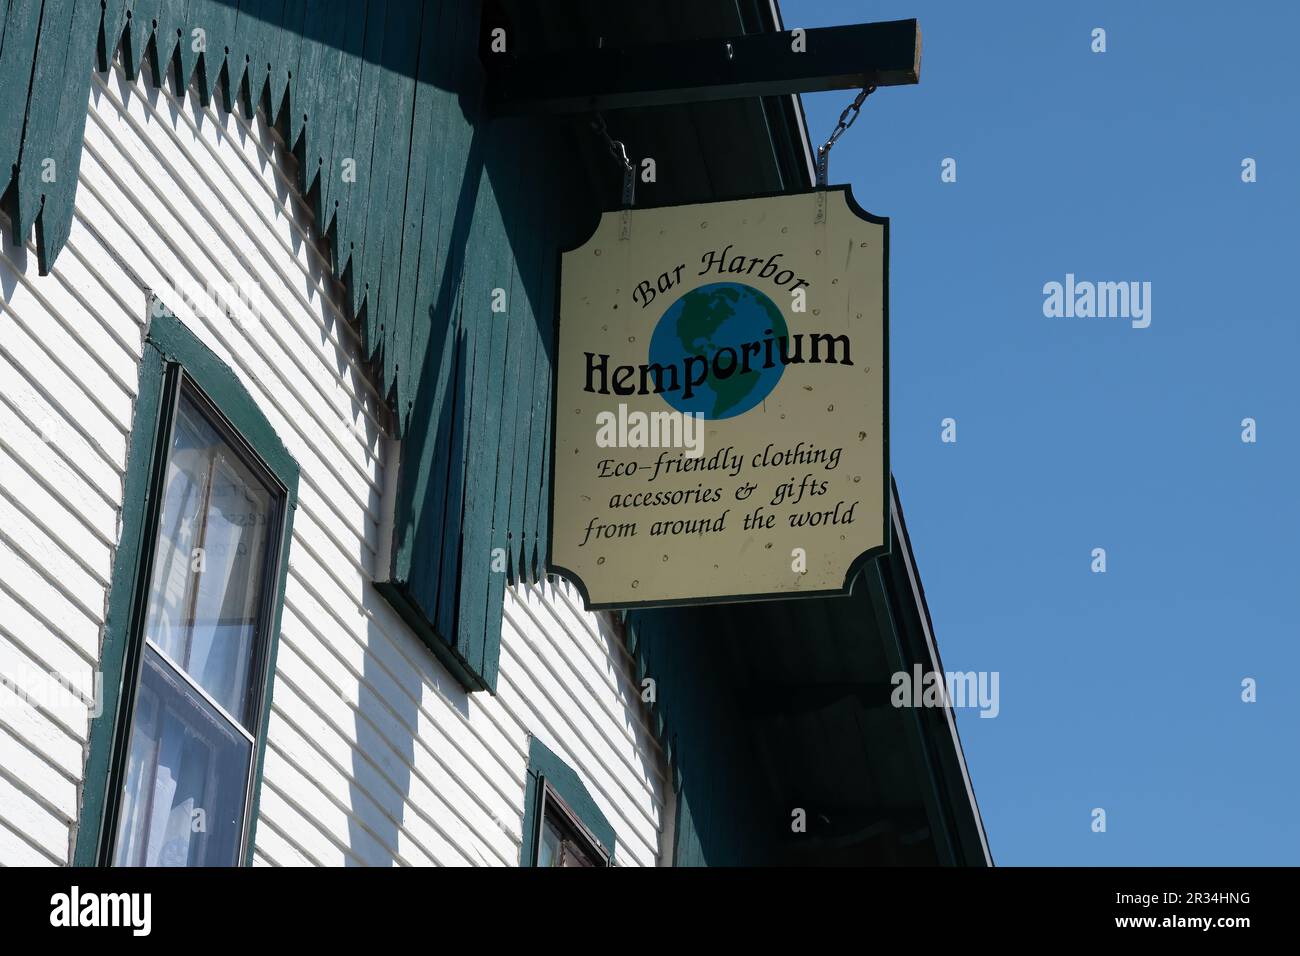 Sign for the Hemporium shop selling eco-friendly clothing and gifts in Bar Harbor, Maine, USA. Stock Photo